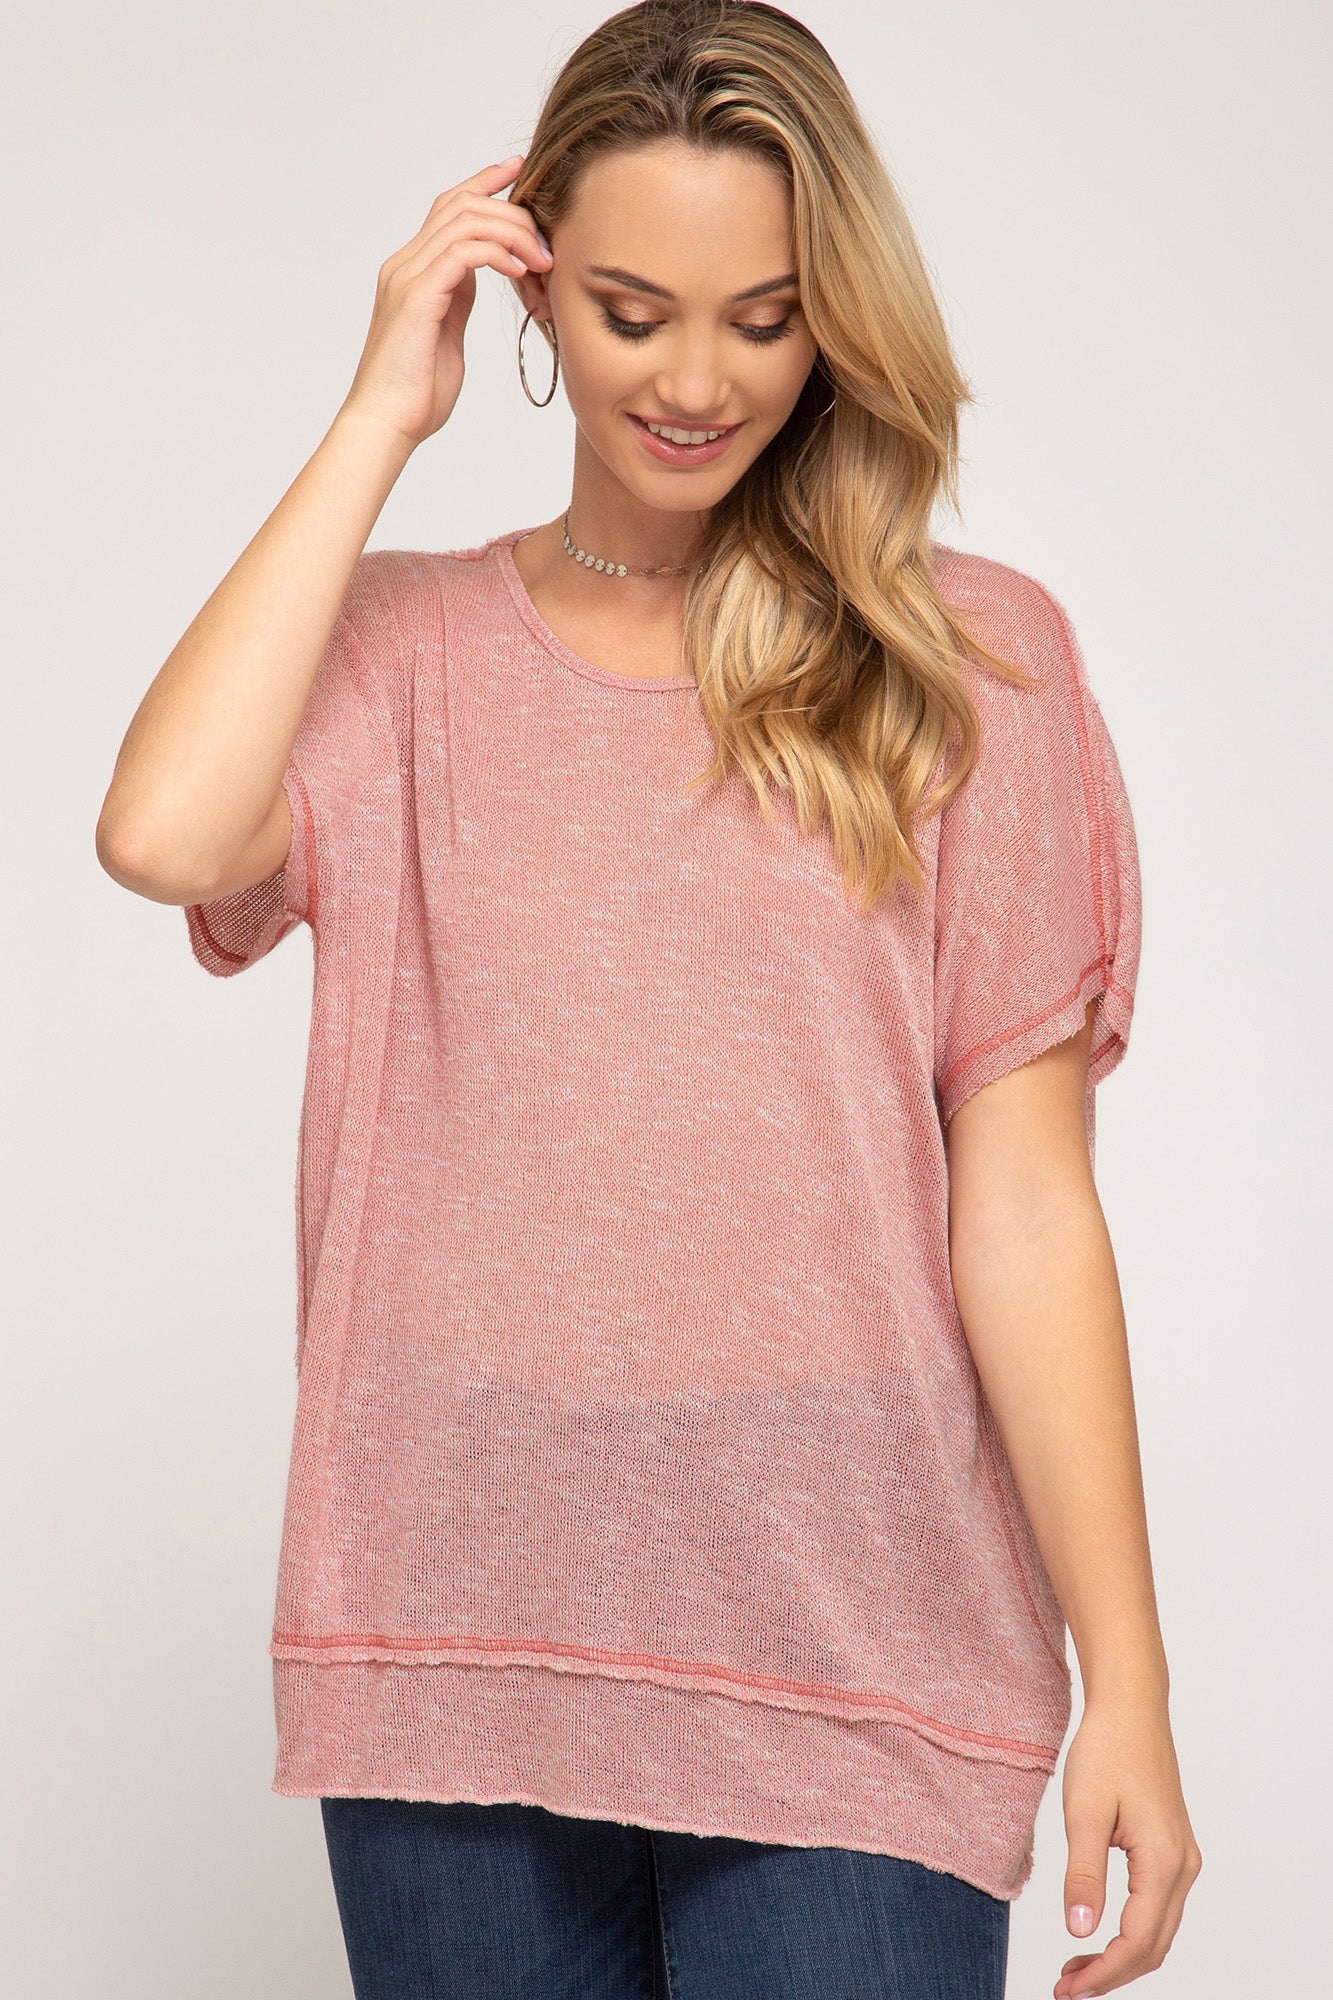 Solid Short Sleeve Top With Open Back Detail!